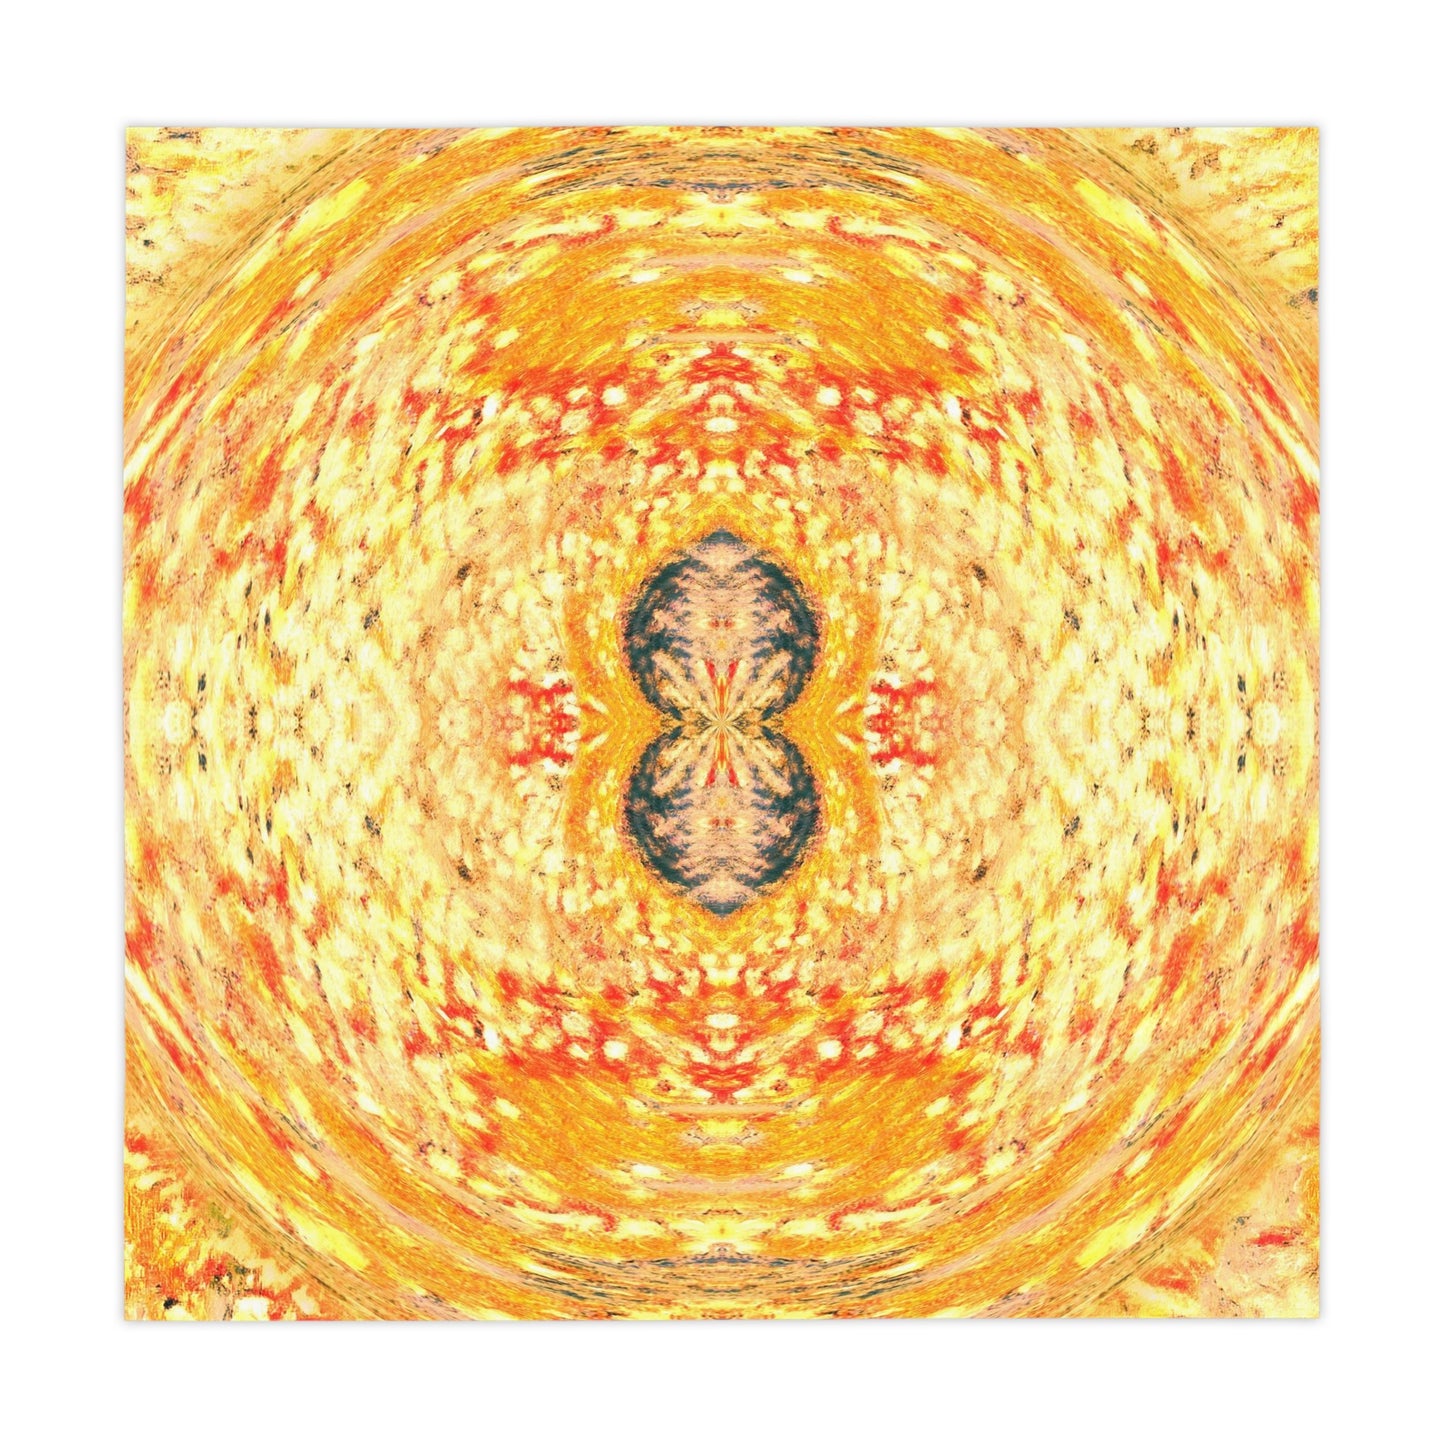 Fire Spirits 55-inch Square Tablecloth